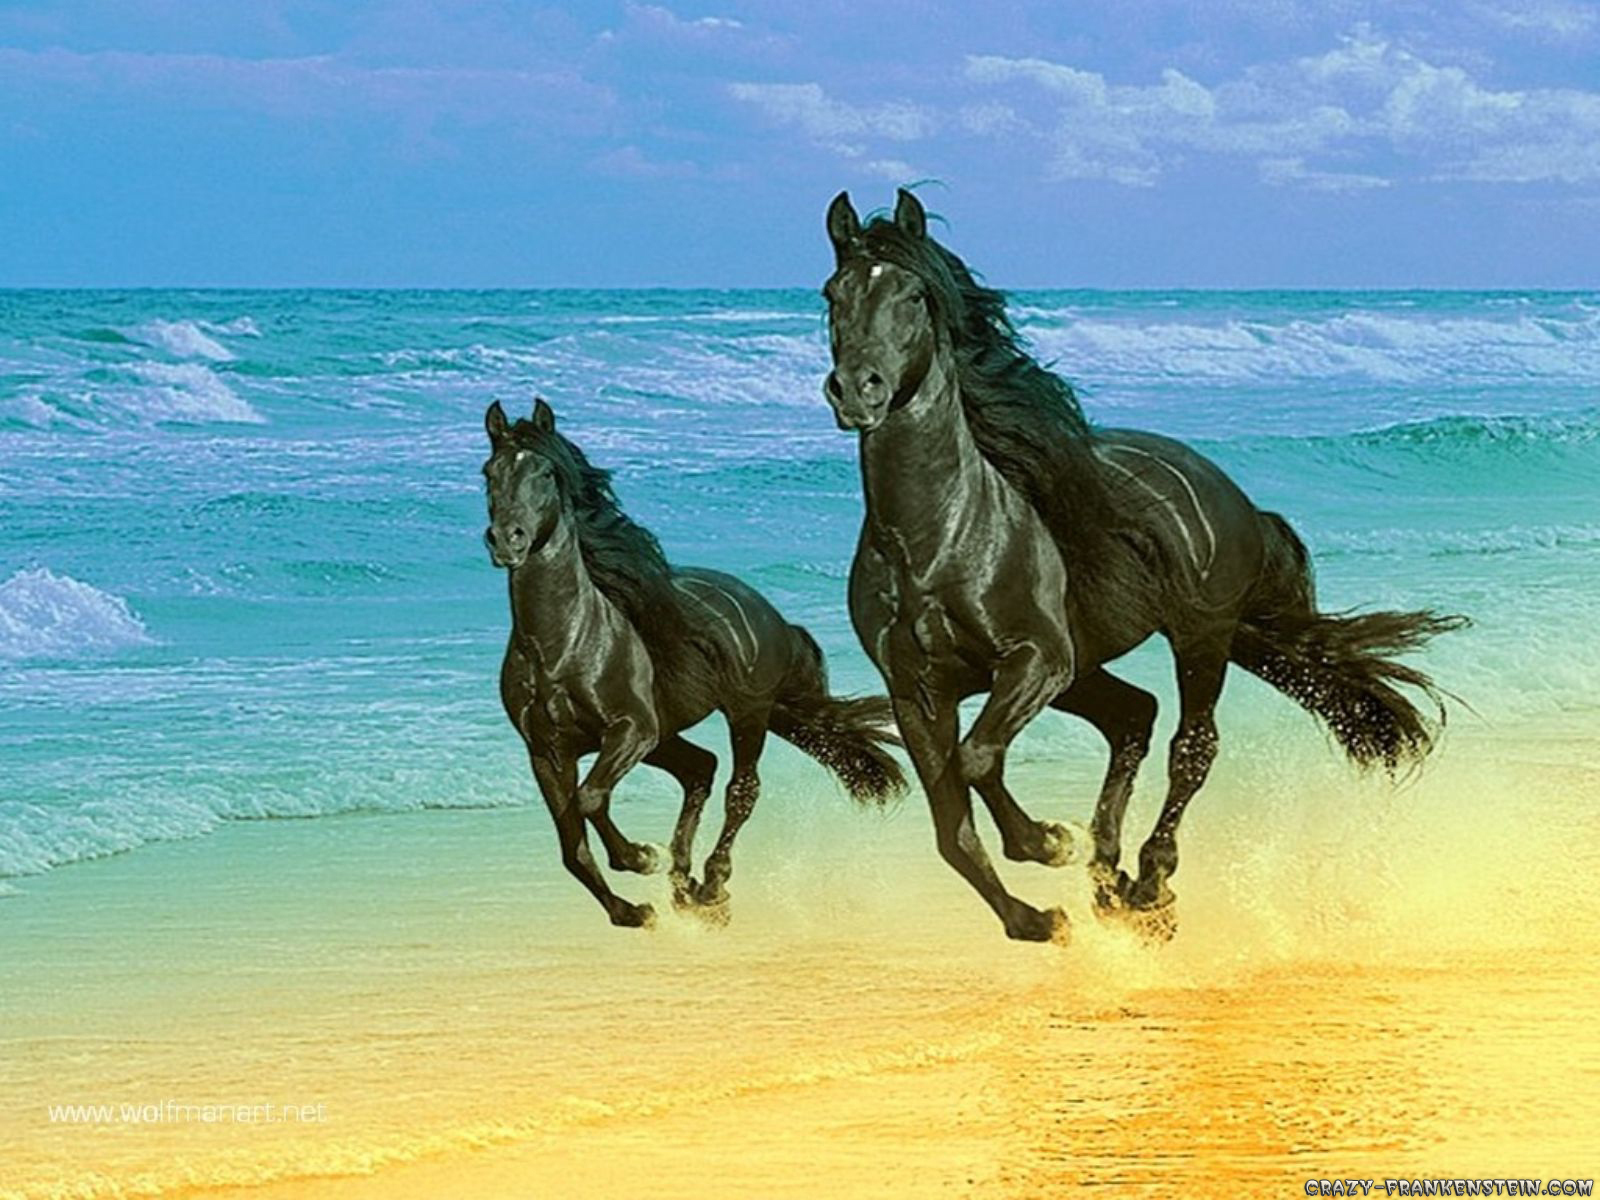 Horses images More horse wallpapers HD wallpaper and